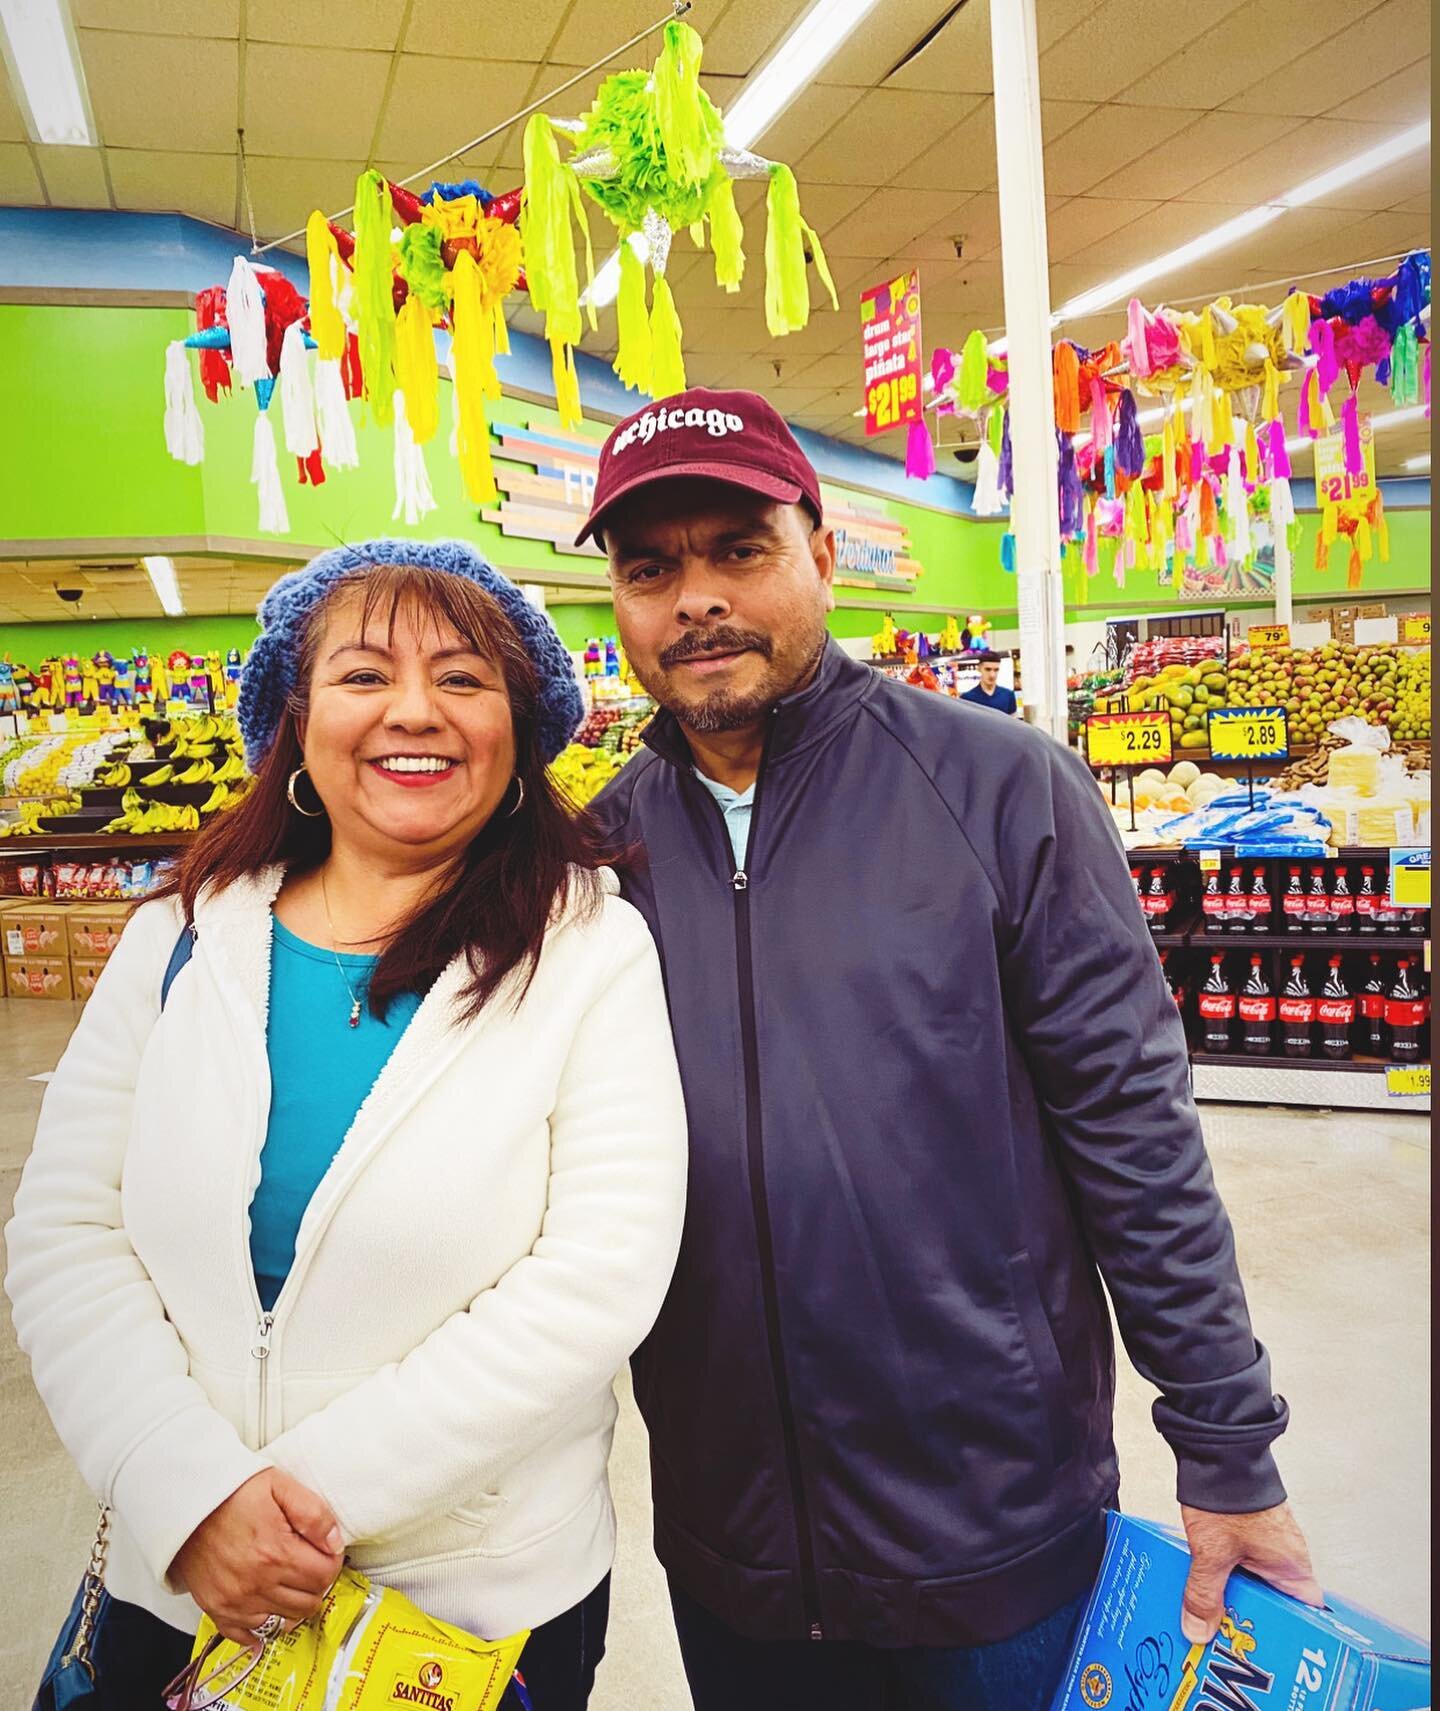 esp. grateful for my mom &amp; pops today, y&rsquo;all keep me grounded and inspired to create a better world for folks like us 🧡

I&rsquo;m blessed to still have y&rsquo;all on this journey with me &amp; I hope for more food city runs for modelo&rs